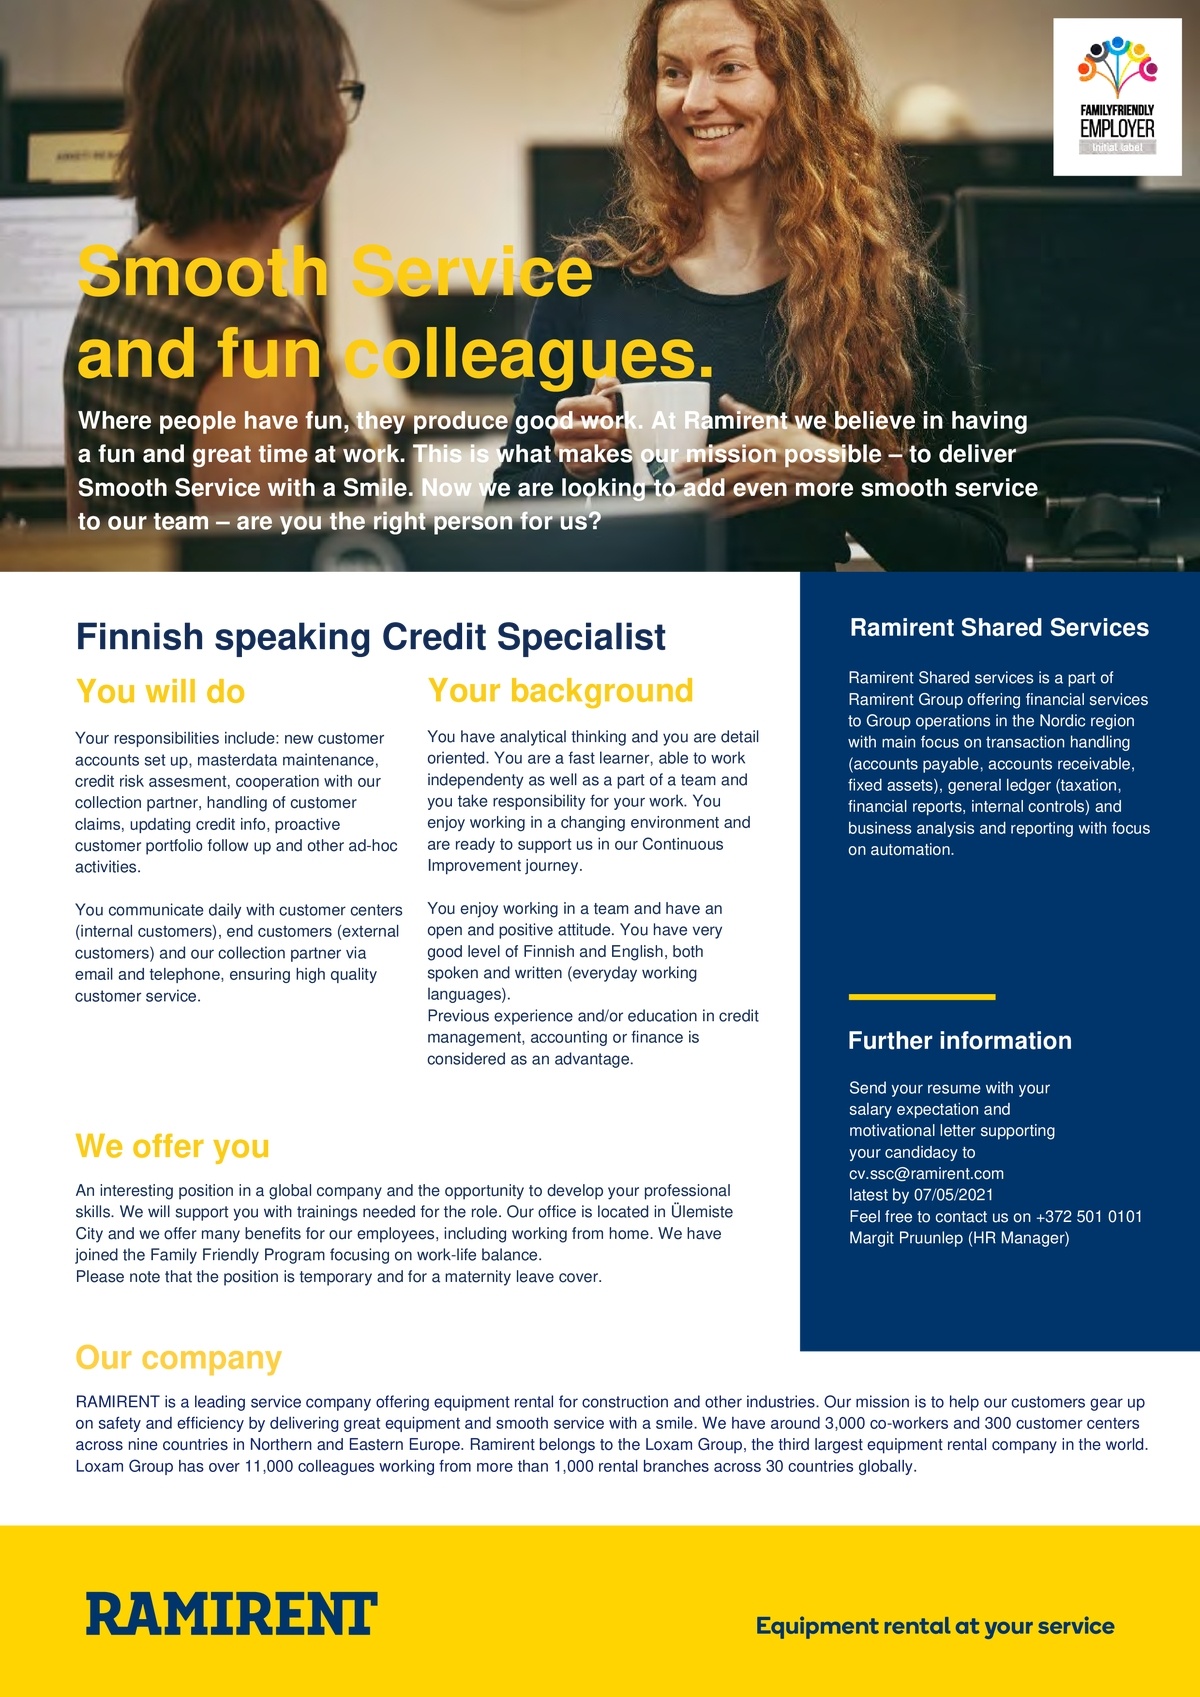 Ramirent Shared Services AS Finnish Speaking Credit Specialist (Temporary)